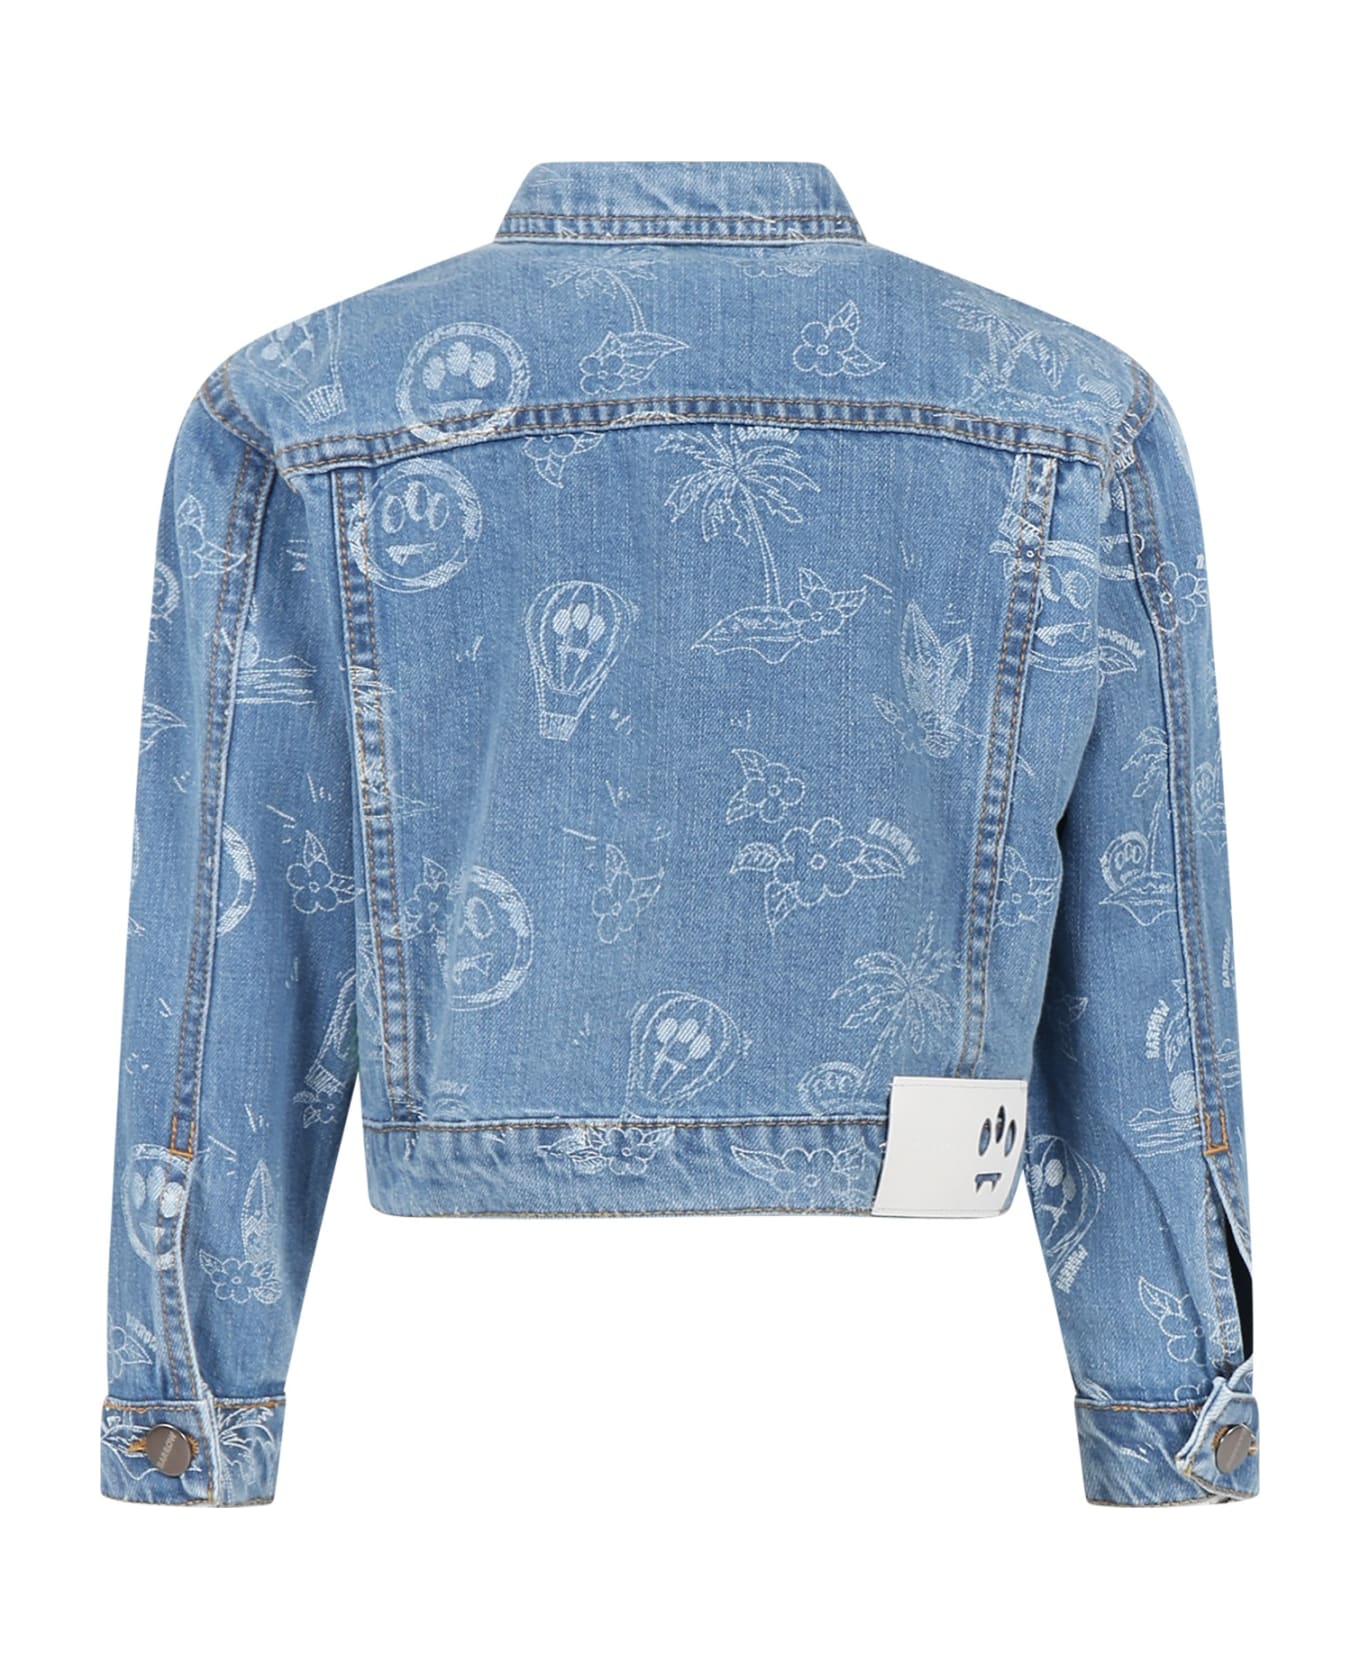 Barrow Light Blue Jacket For Kids With Iconic Smiley - Denim